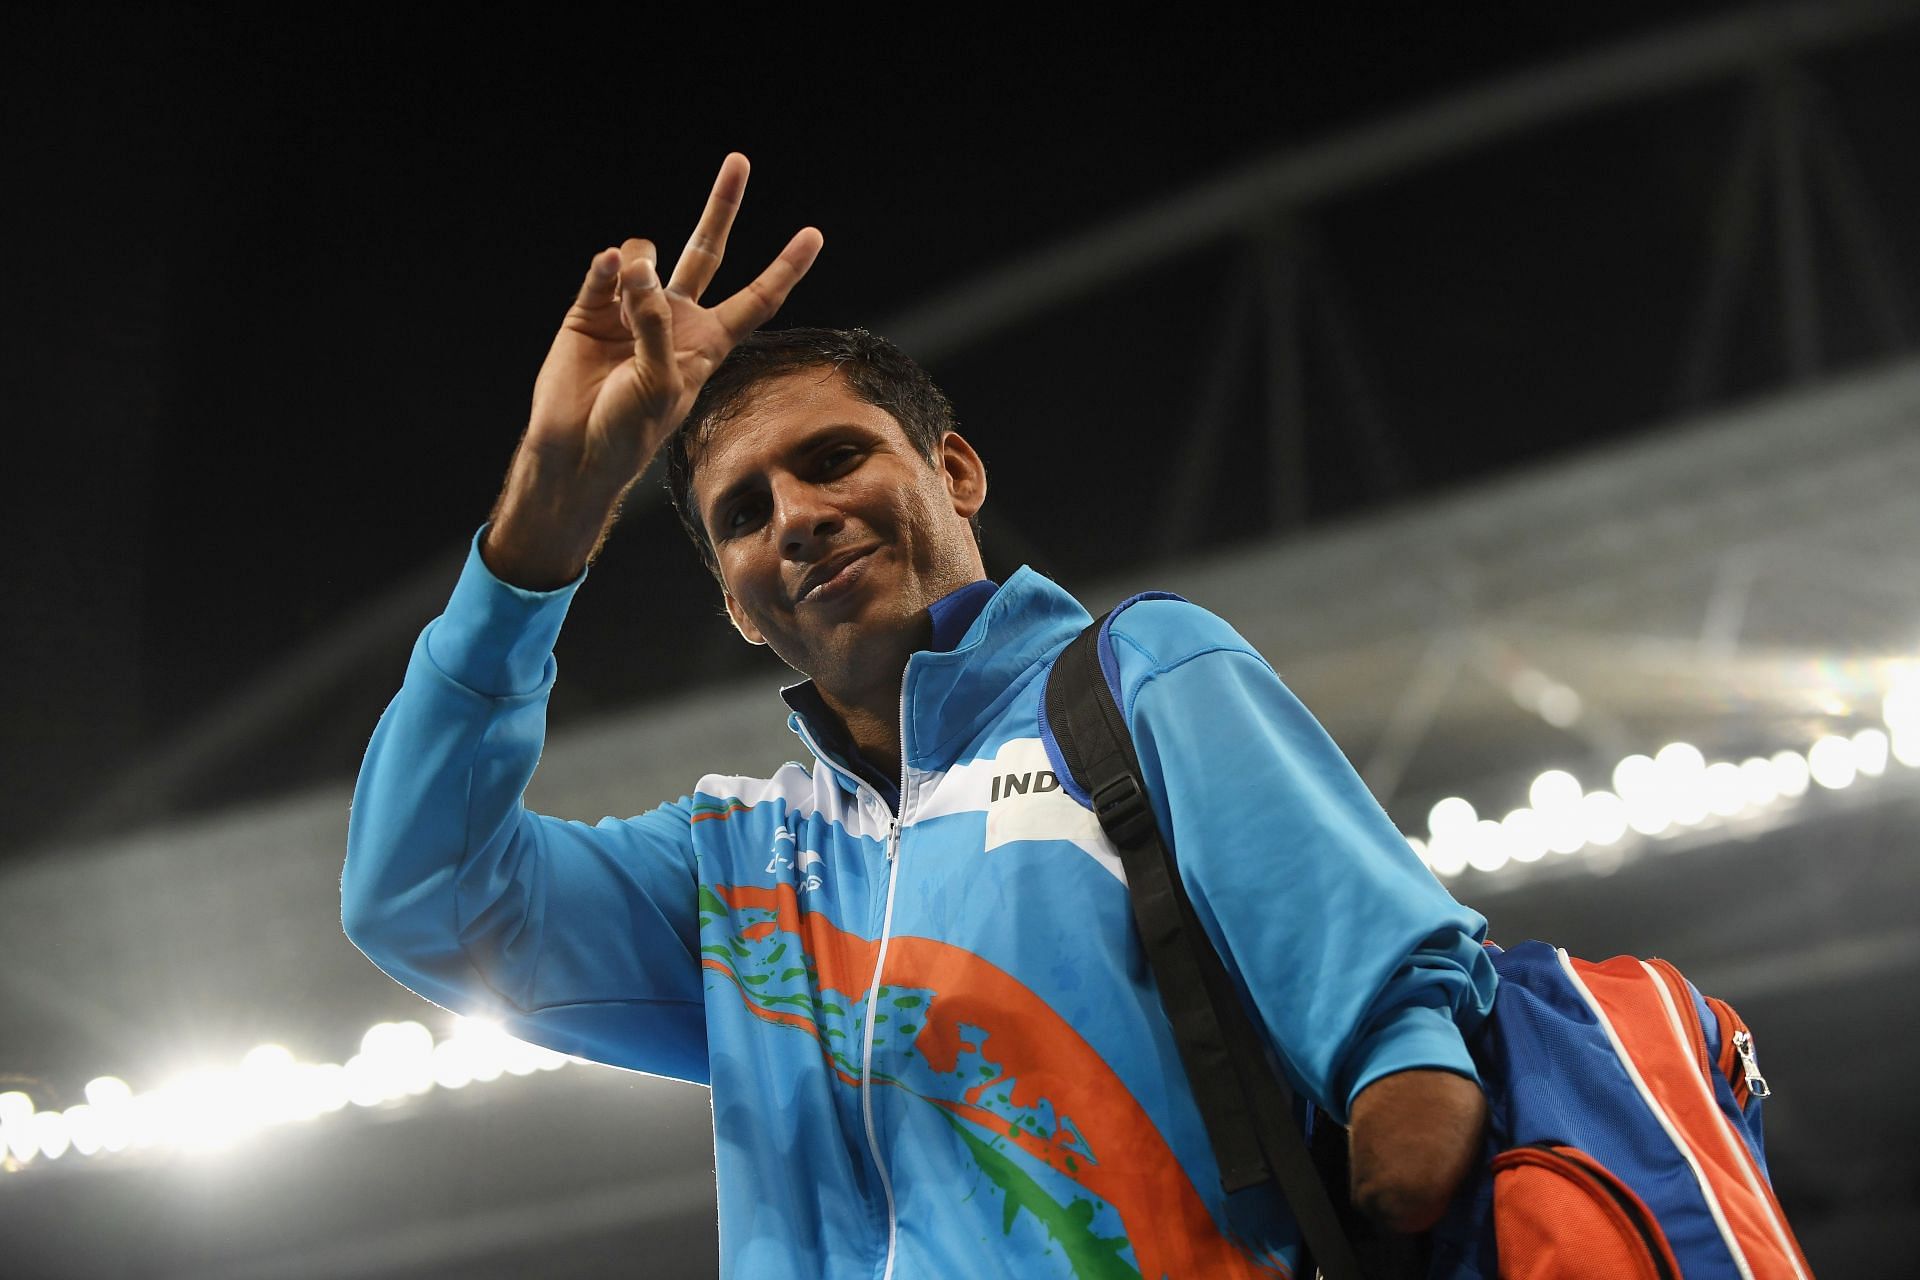 Devendra Jhajharia at the 2016 Rio Paralympics (Image courtesy: Getty Images)